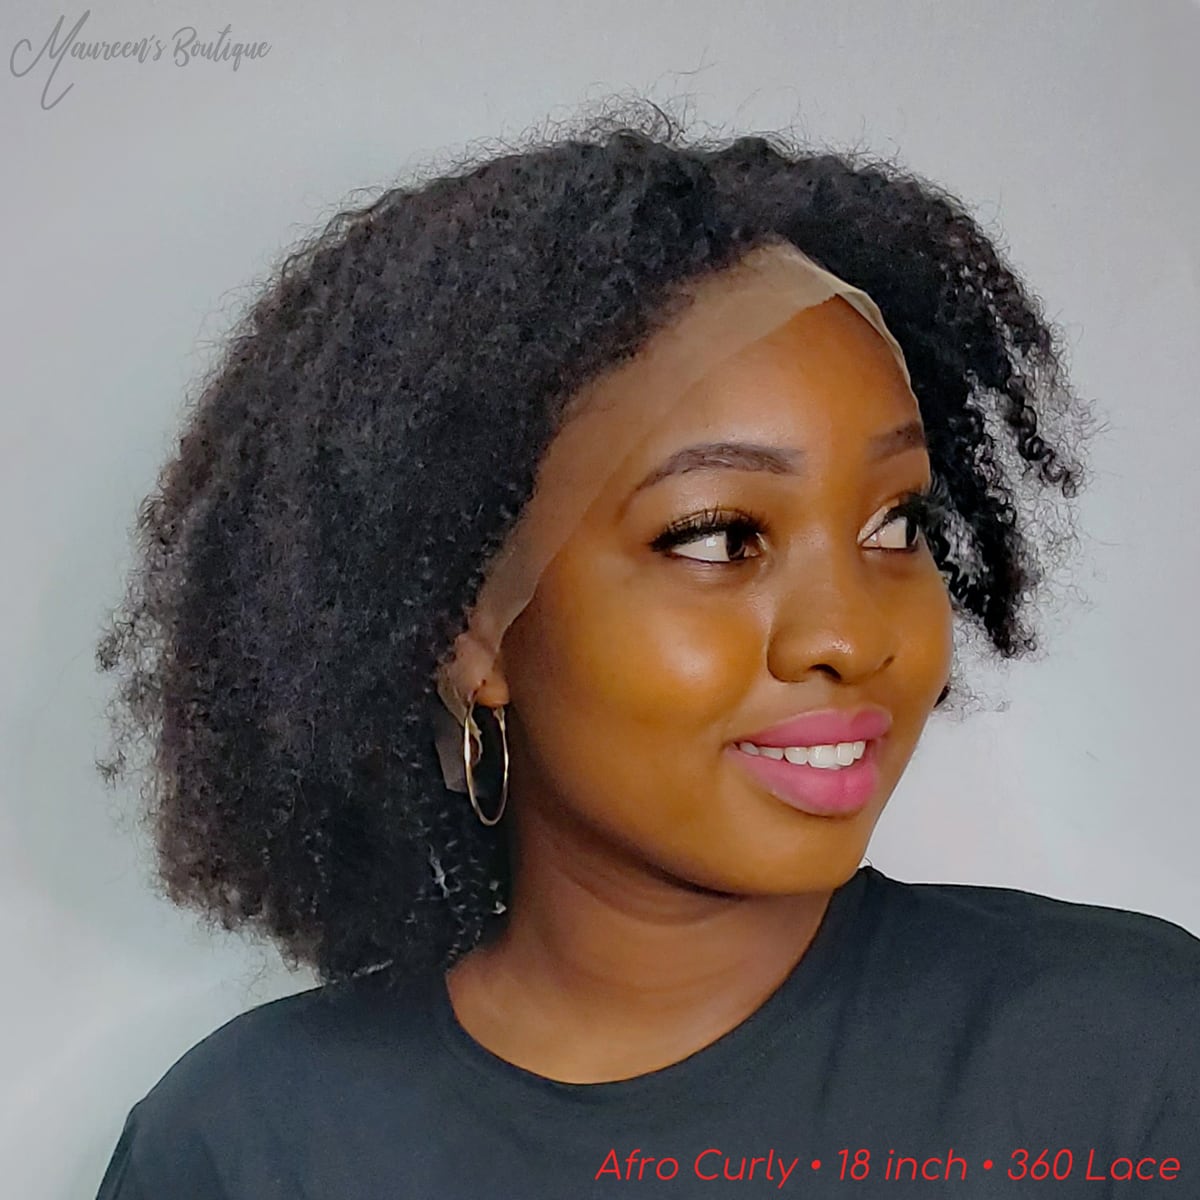 Afro Curly wig on model 4